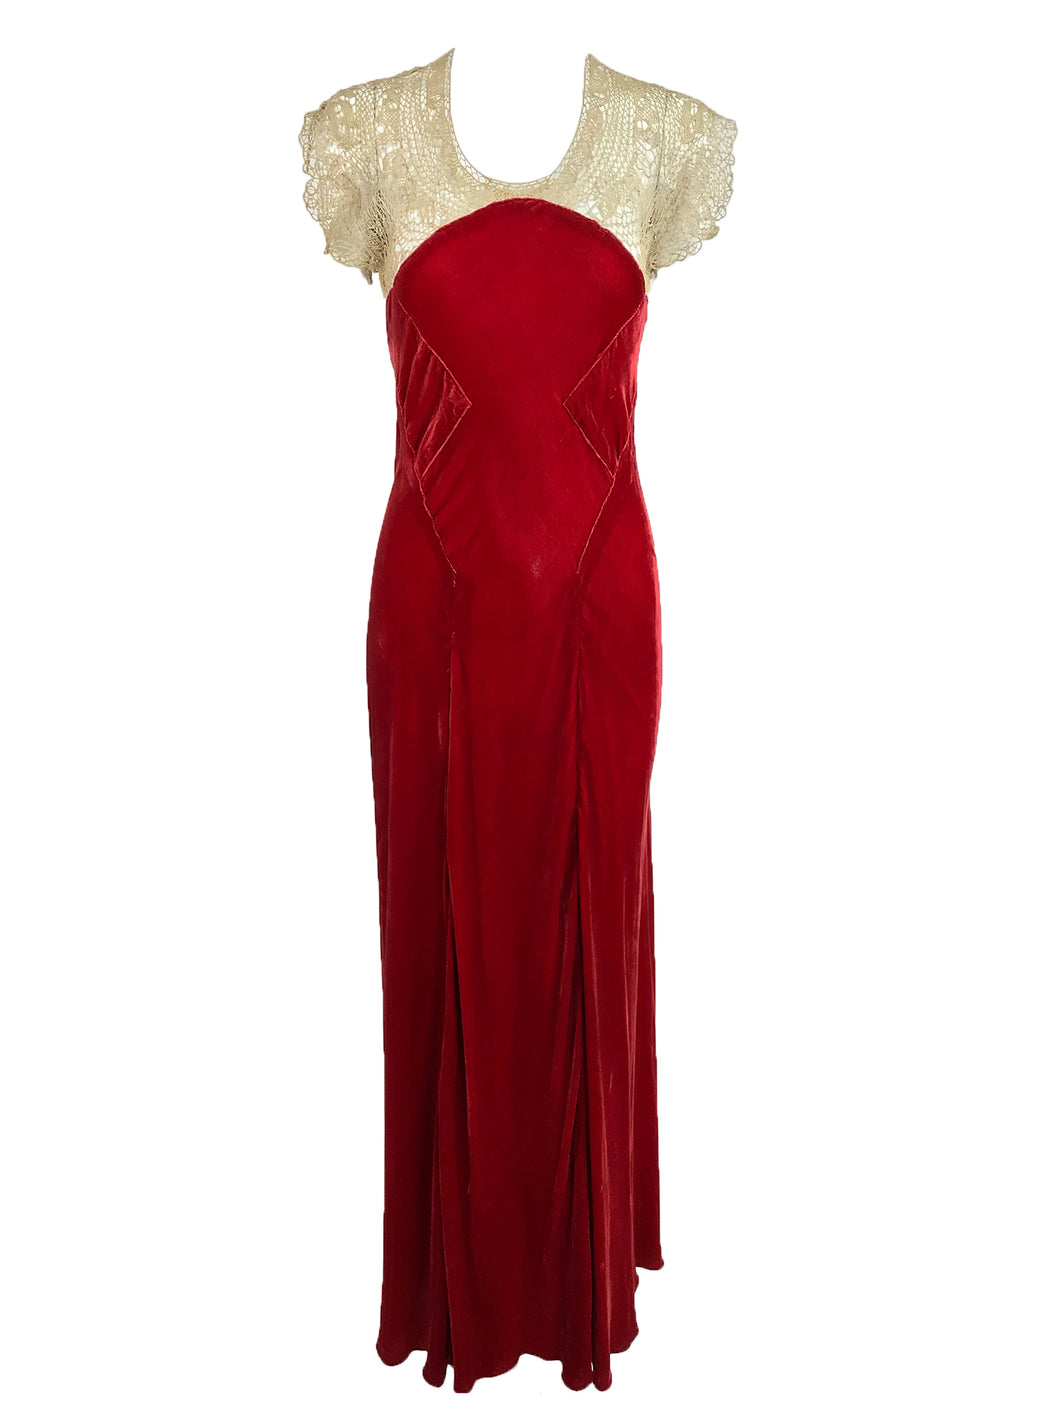 SOLD 1930s Tape Lace and Red Velvet Bias Cut Evening Dress – Palm Beach  Vintage